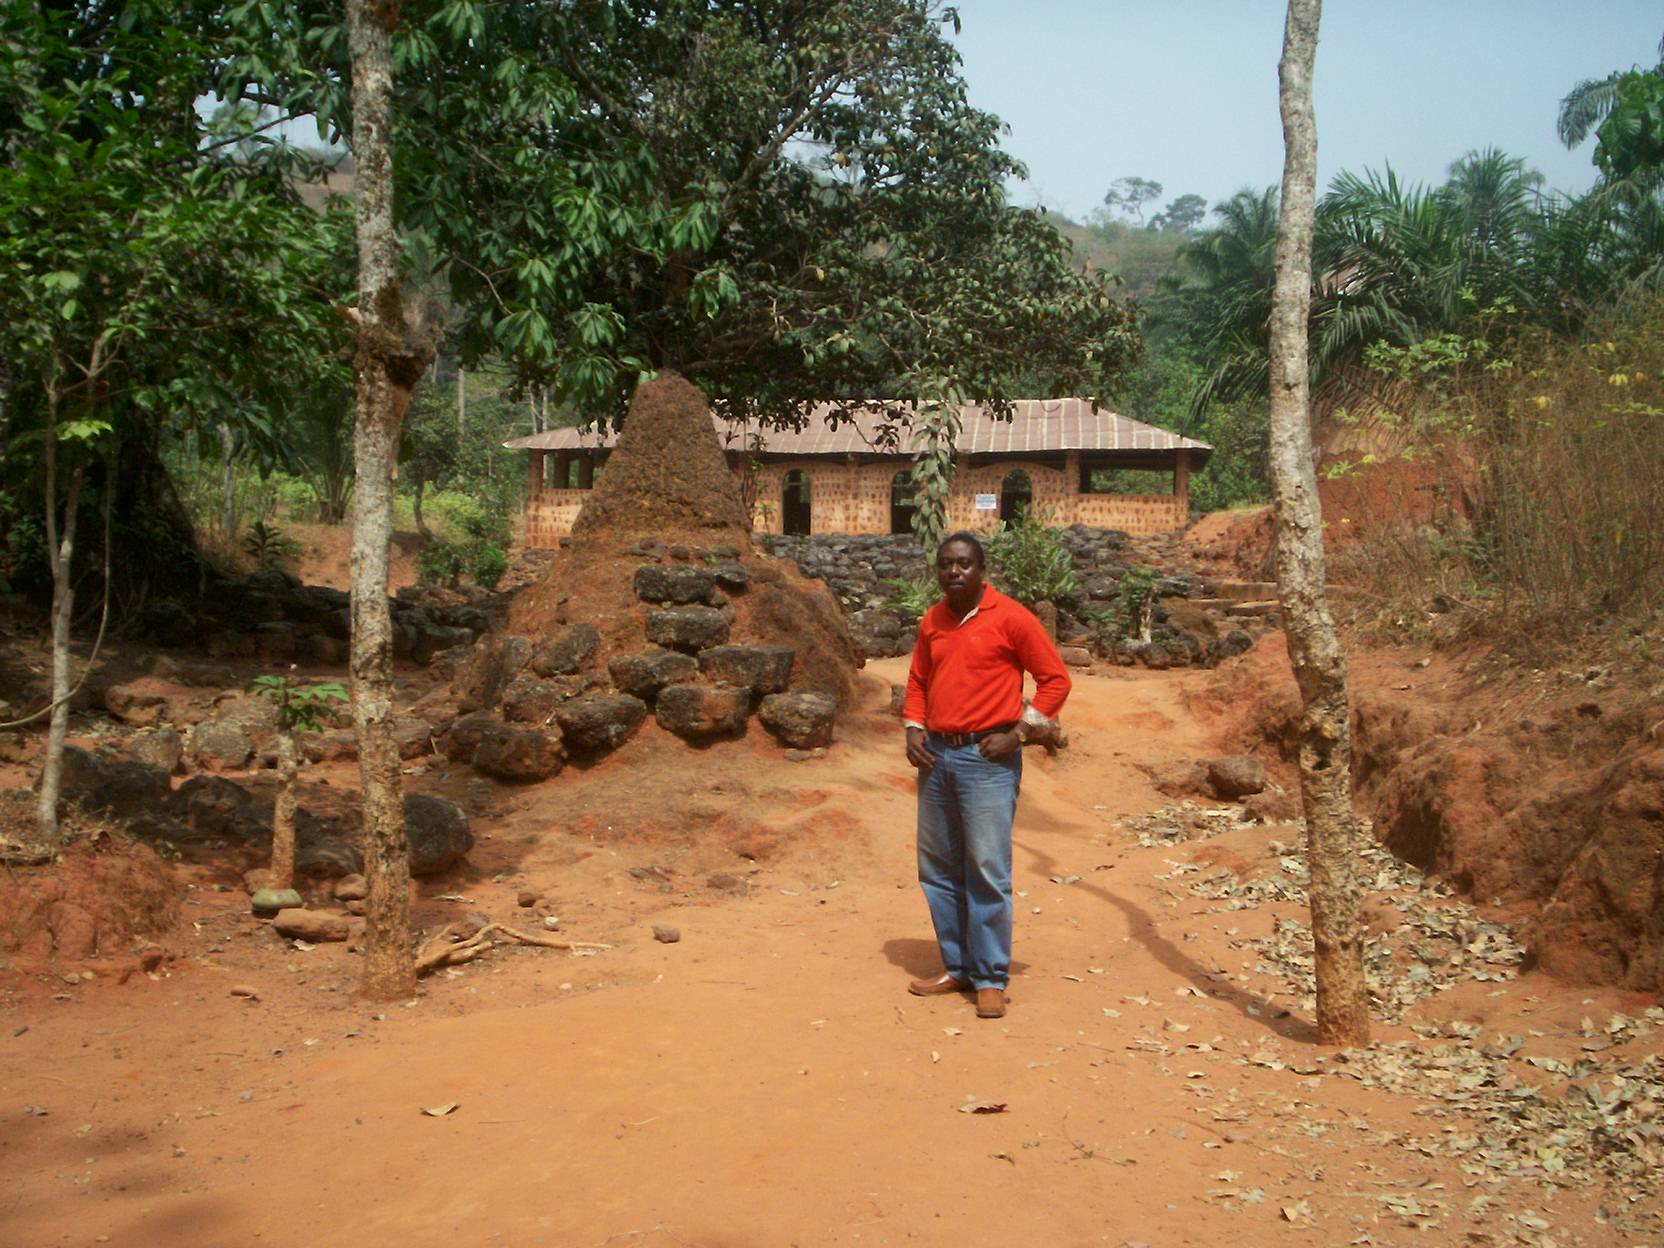 The Odegwoo shrine in Lejja, southeastern Nigeria is associated with fertility. Its worshippers sit at the north and south sides. And the north-south orientation is based on the local philosophy that the "ingredients" needed for procreation are very fragile and should not be exposed to the radiant heat from the Sun (on the east-west axis).